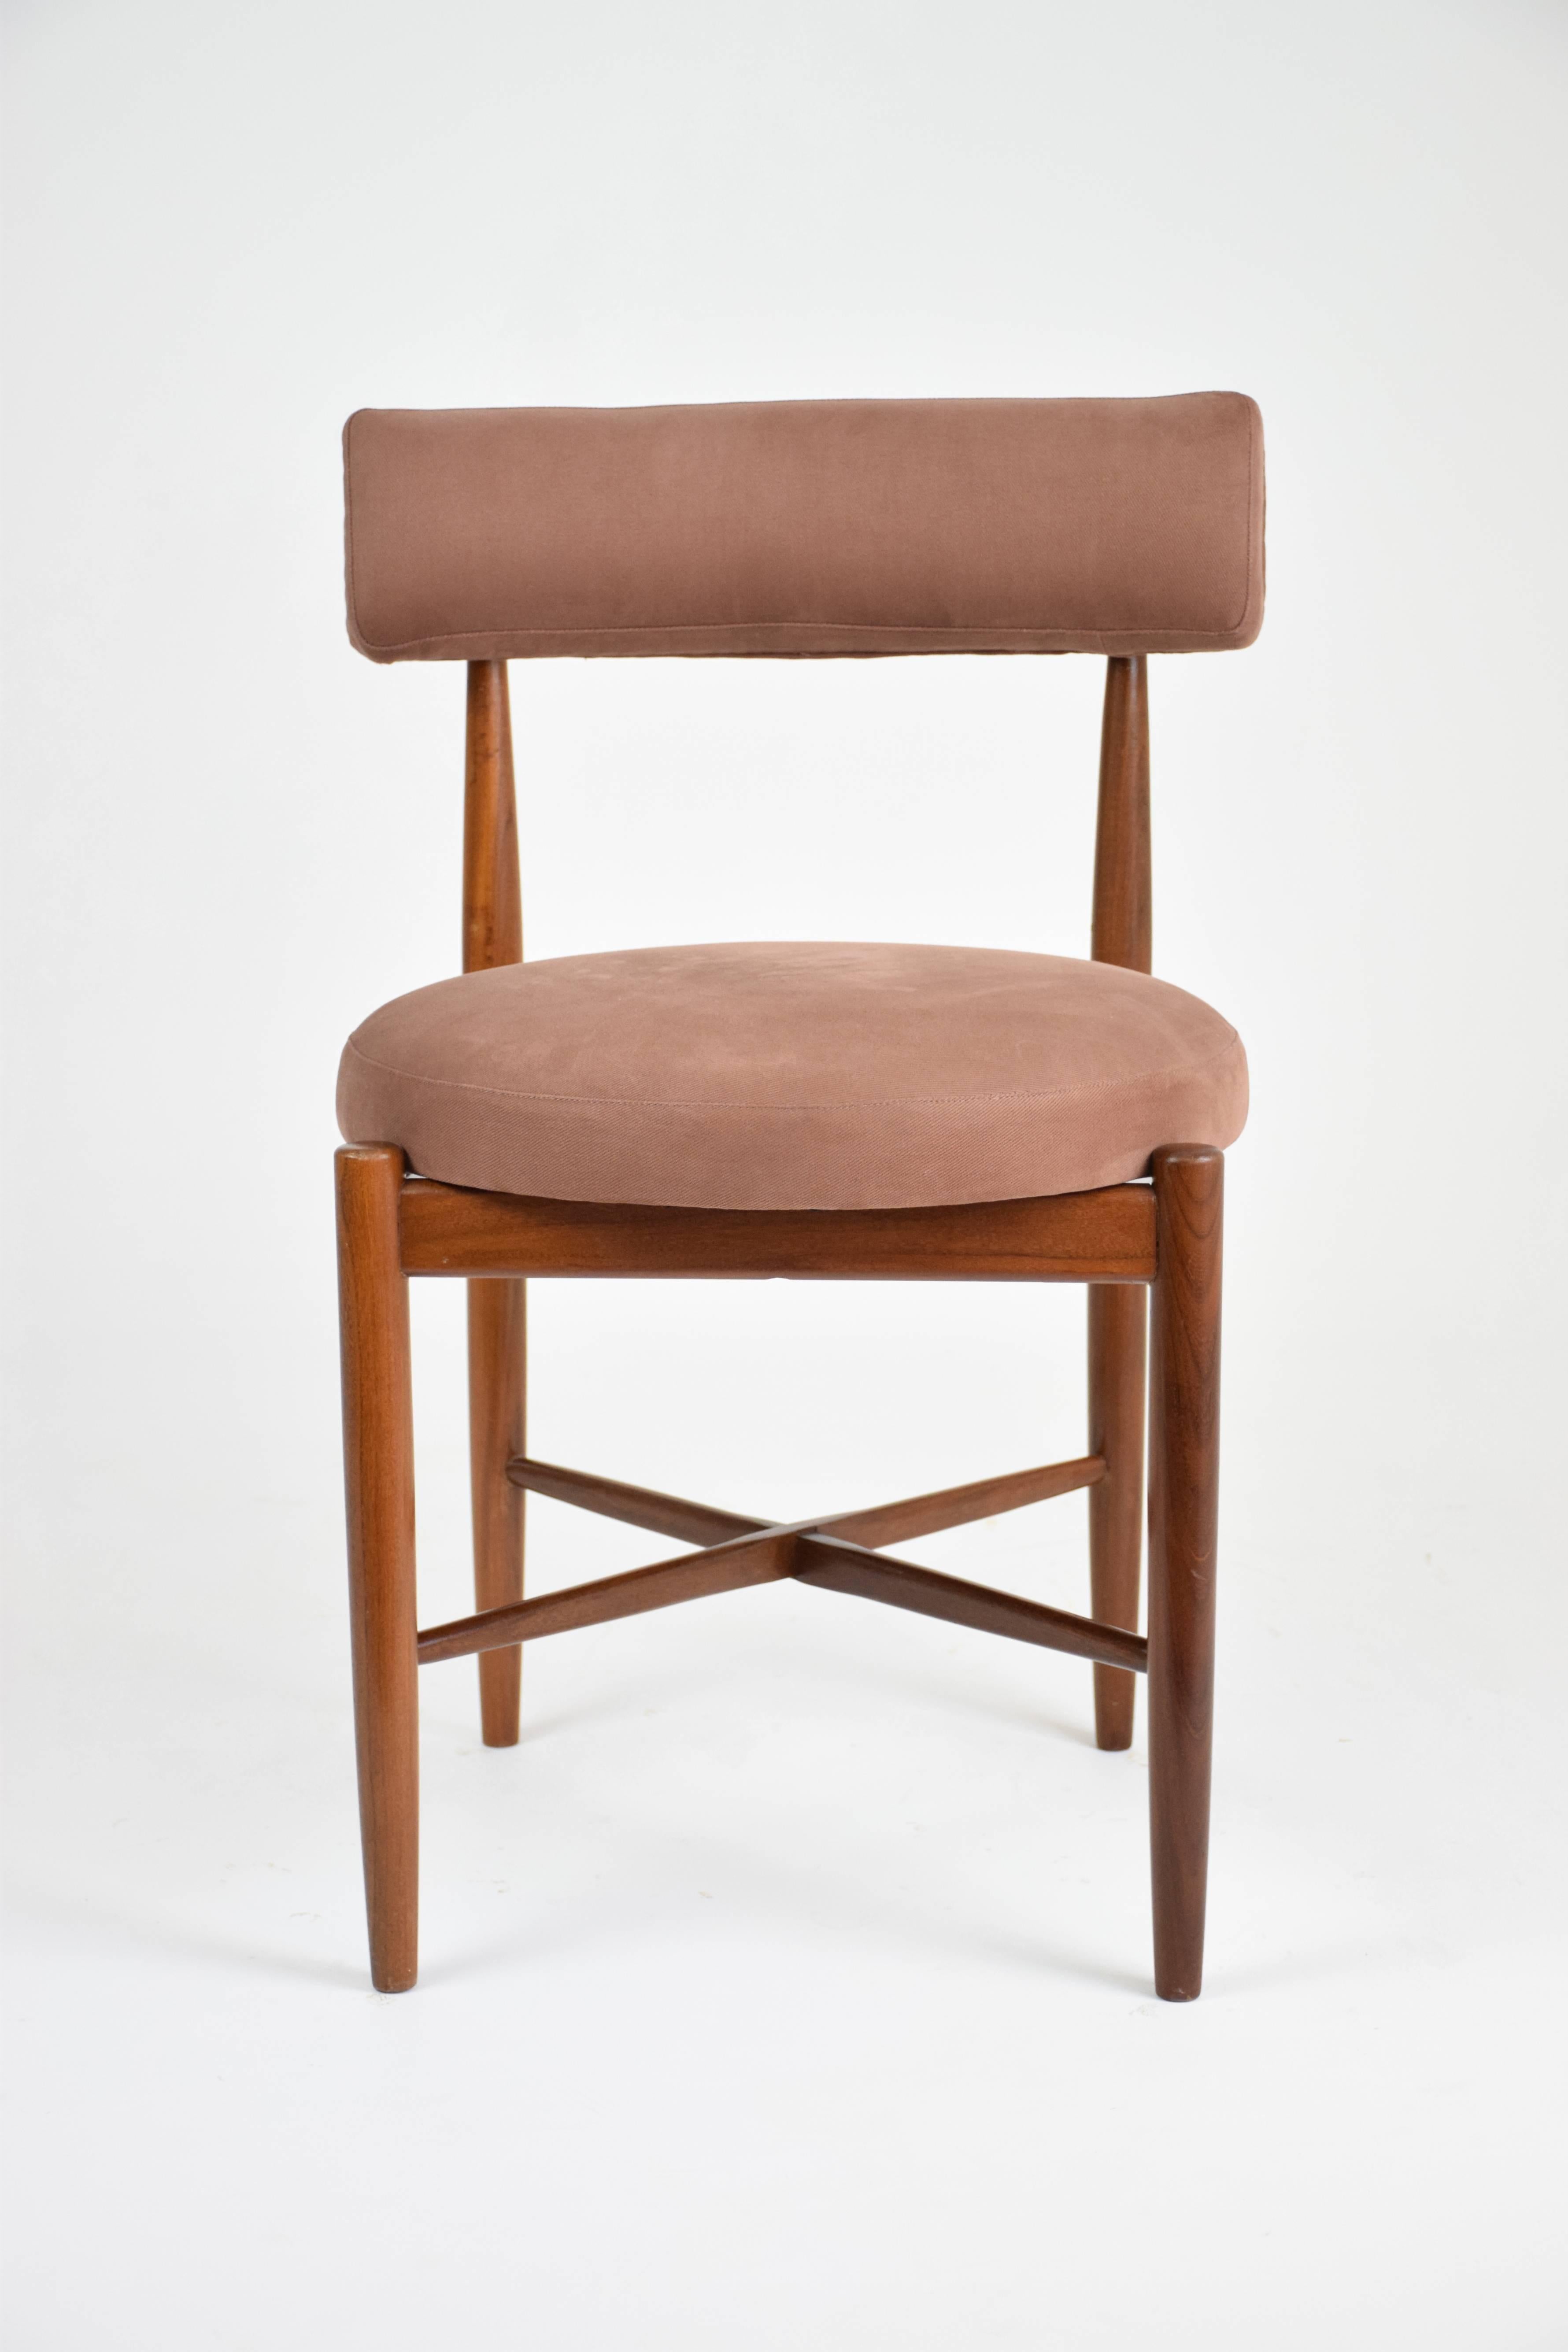 20th Century Mid-Century Teak Dining Chairs by G-Plan